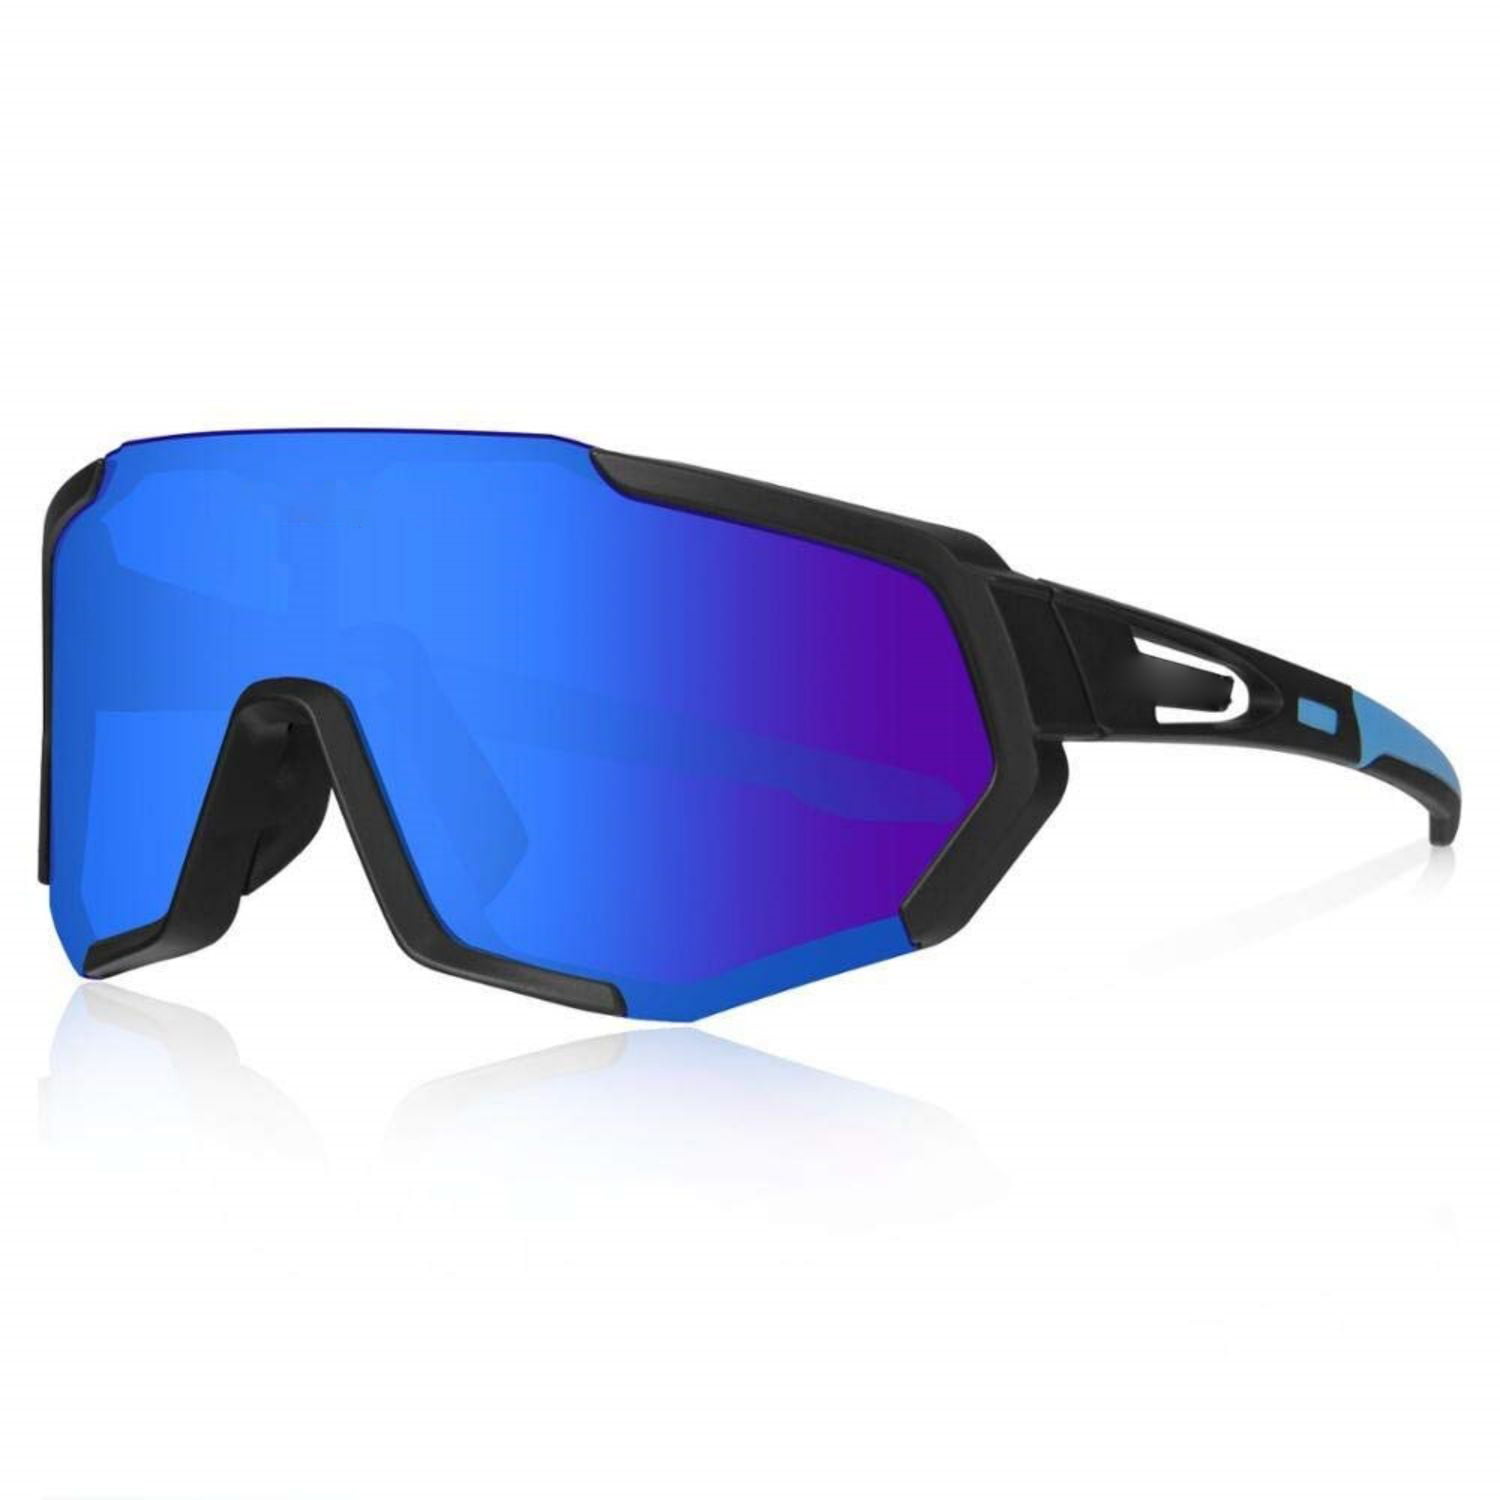 Polarized Sport Cycling Glasses Goggles TR90 Driving Fishing Mirror Sunglasses 3 